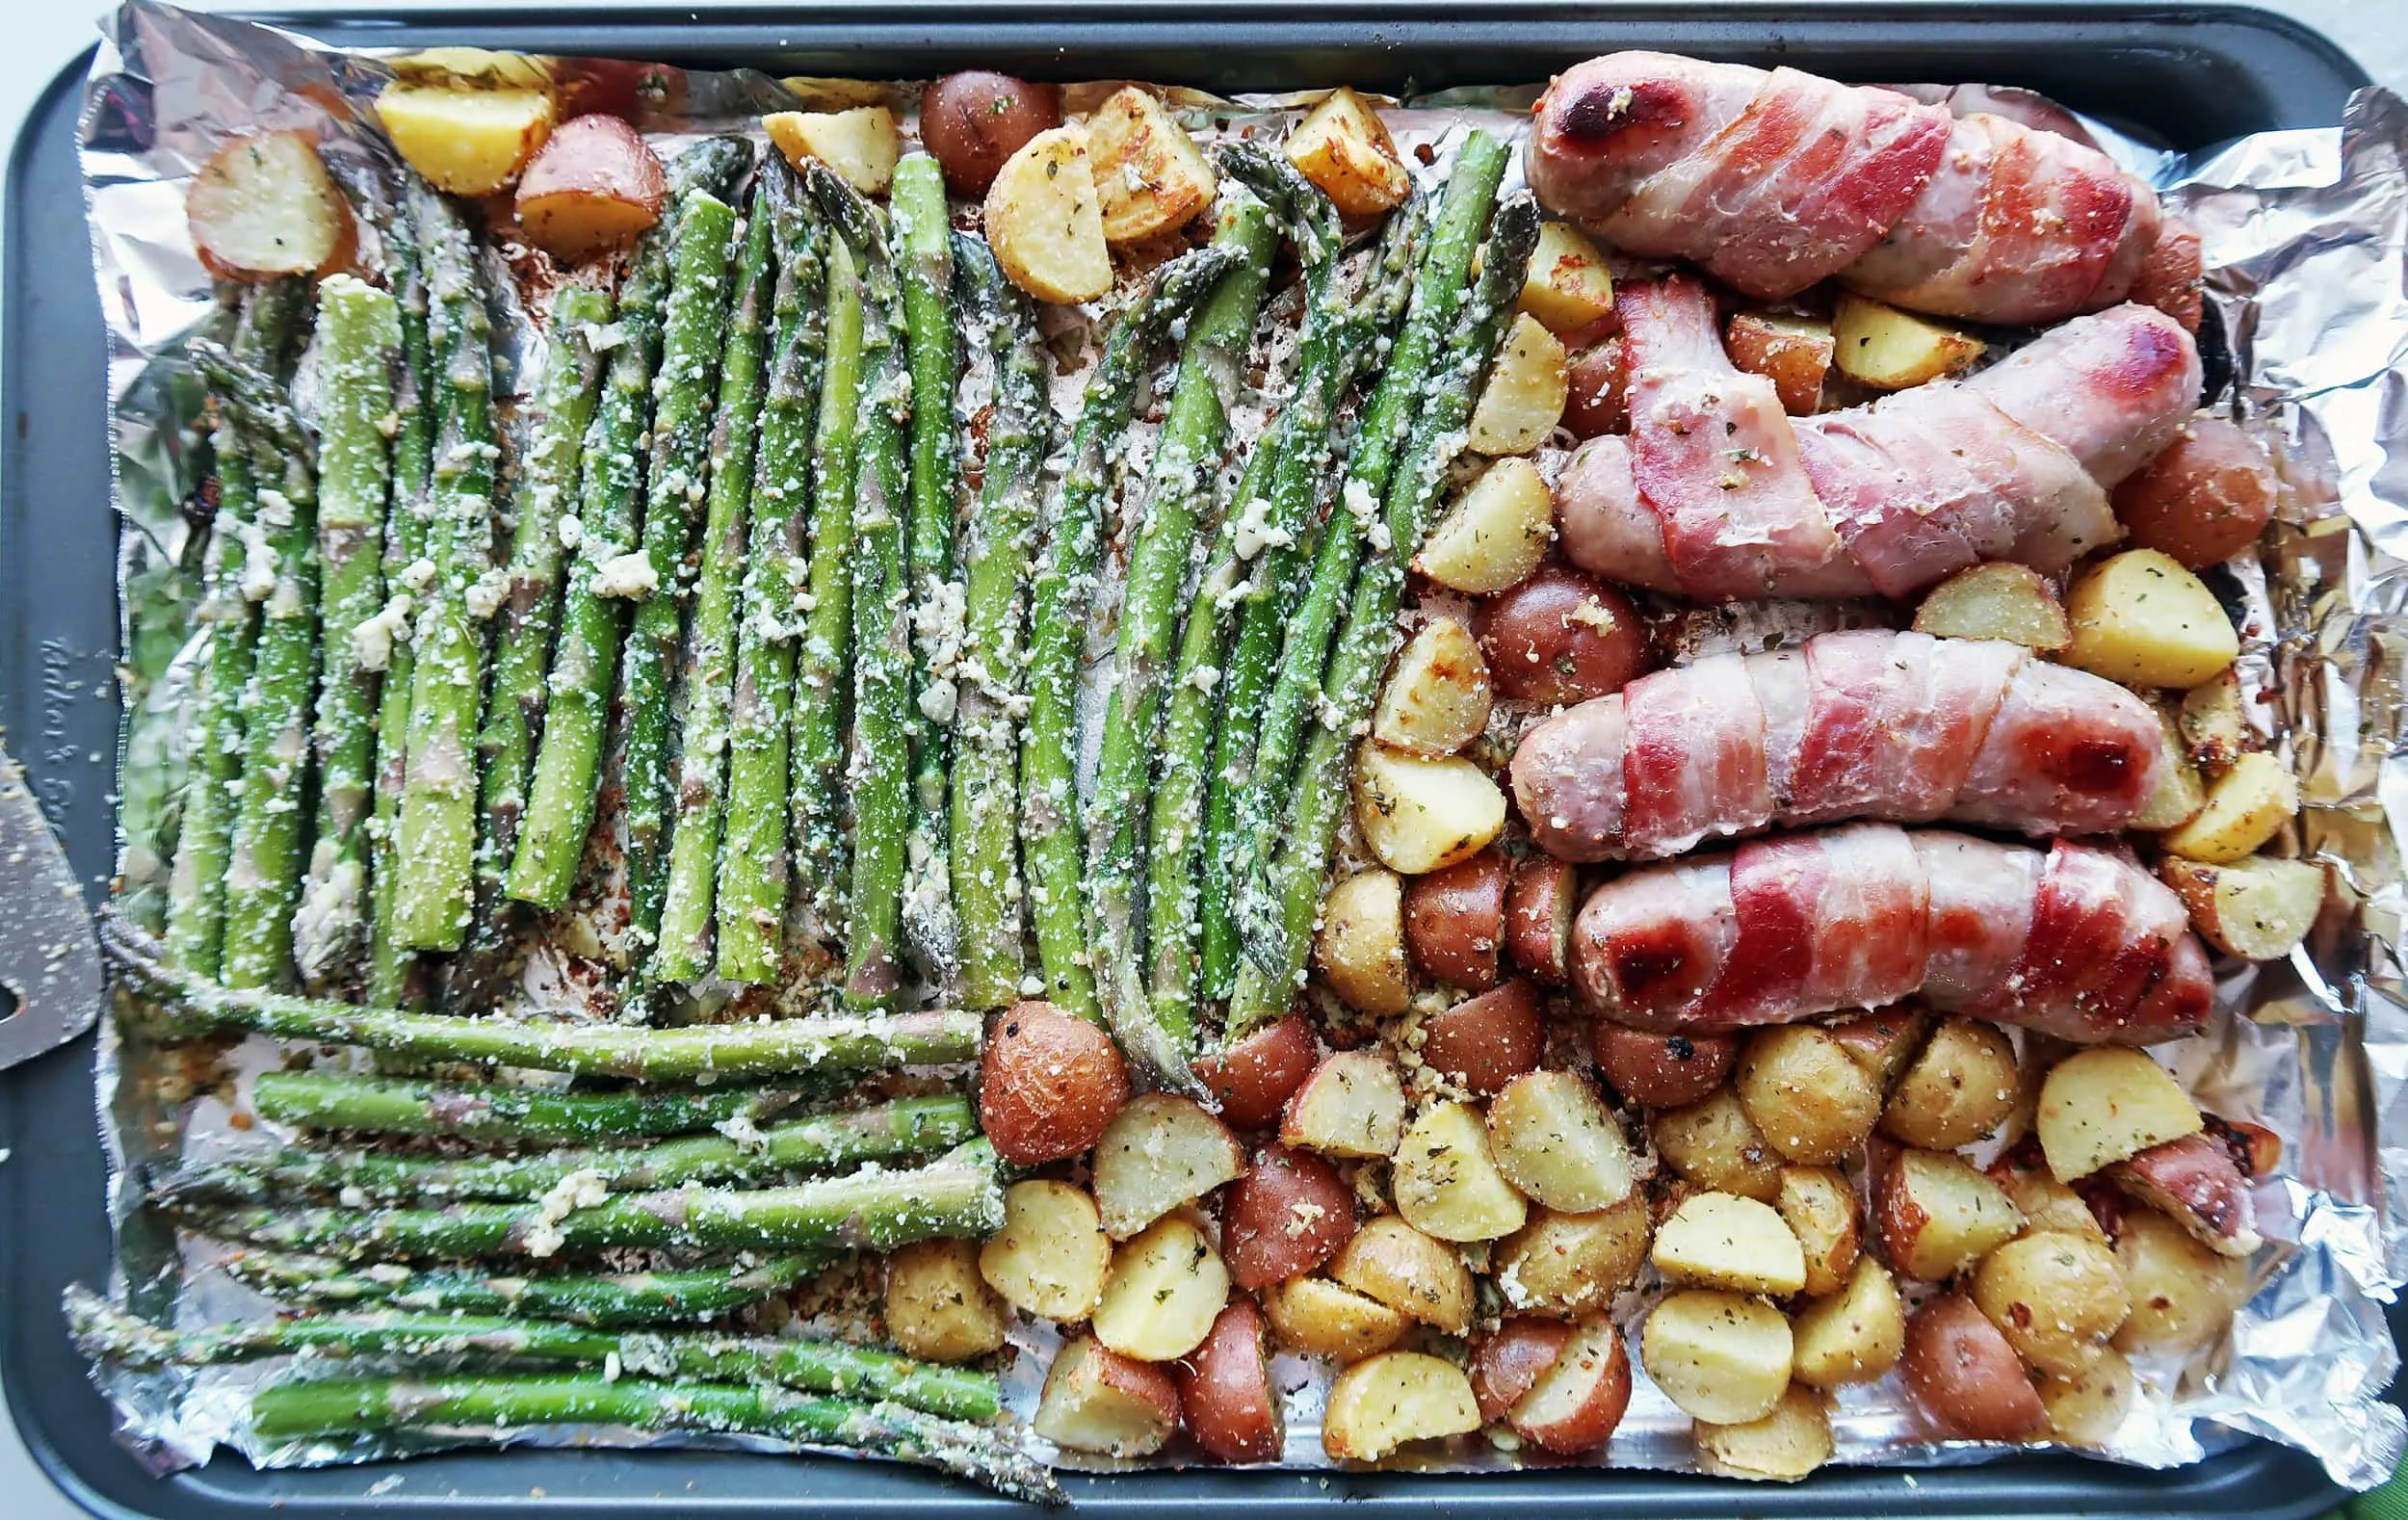 Bacon-wrapped sausages and vegetables on a baking sheet.